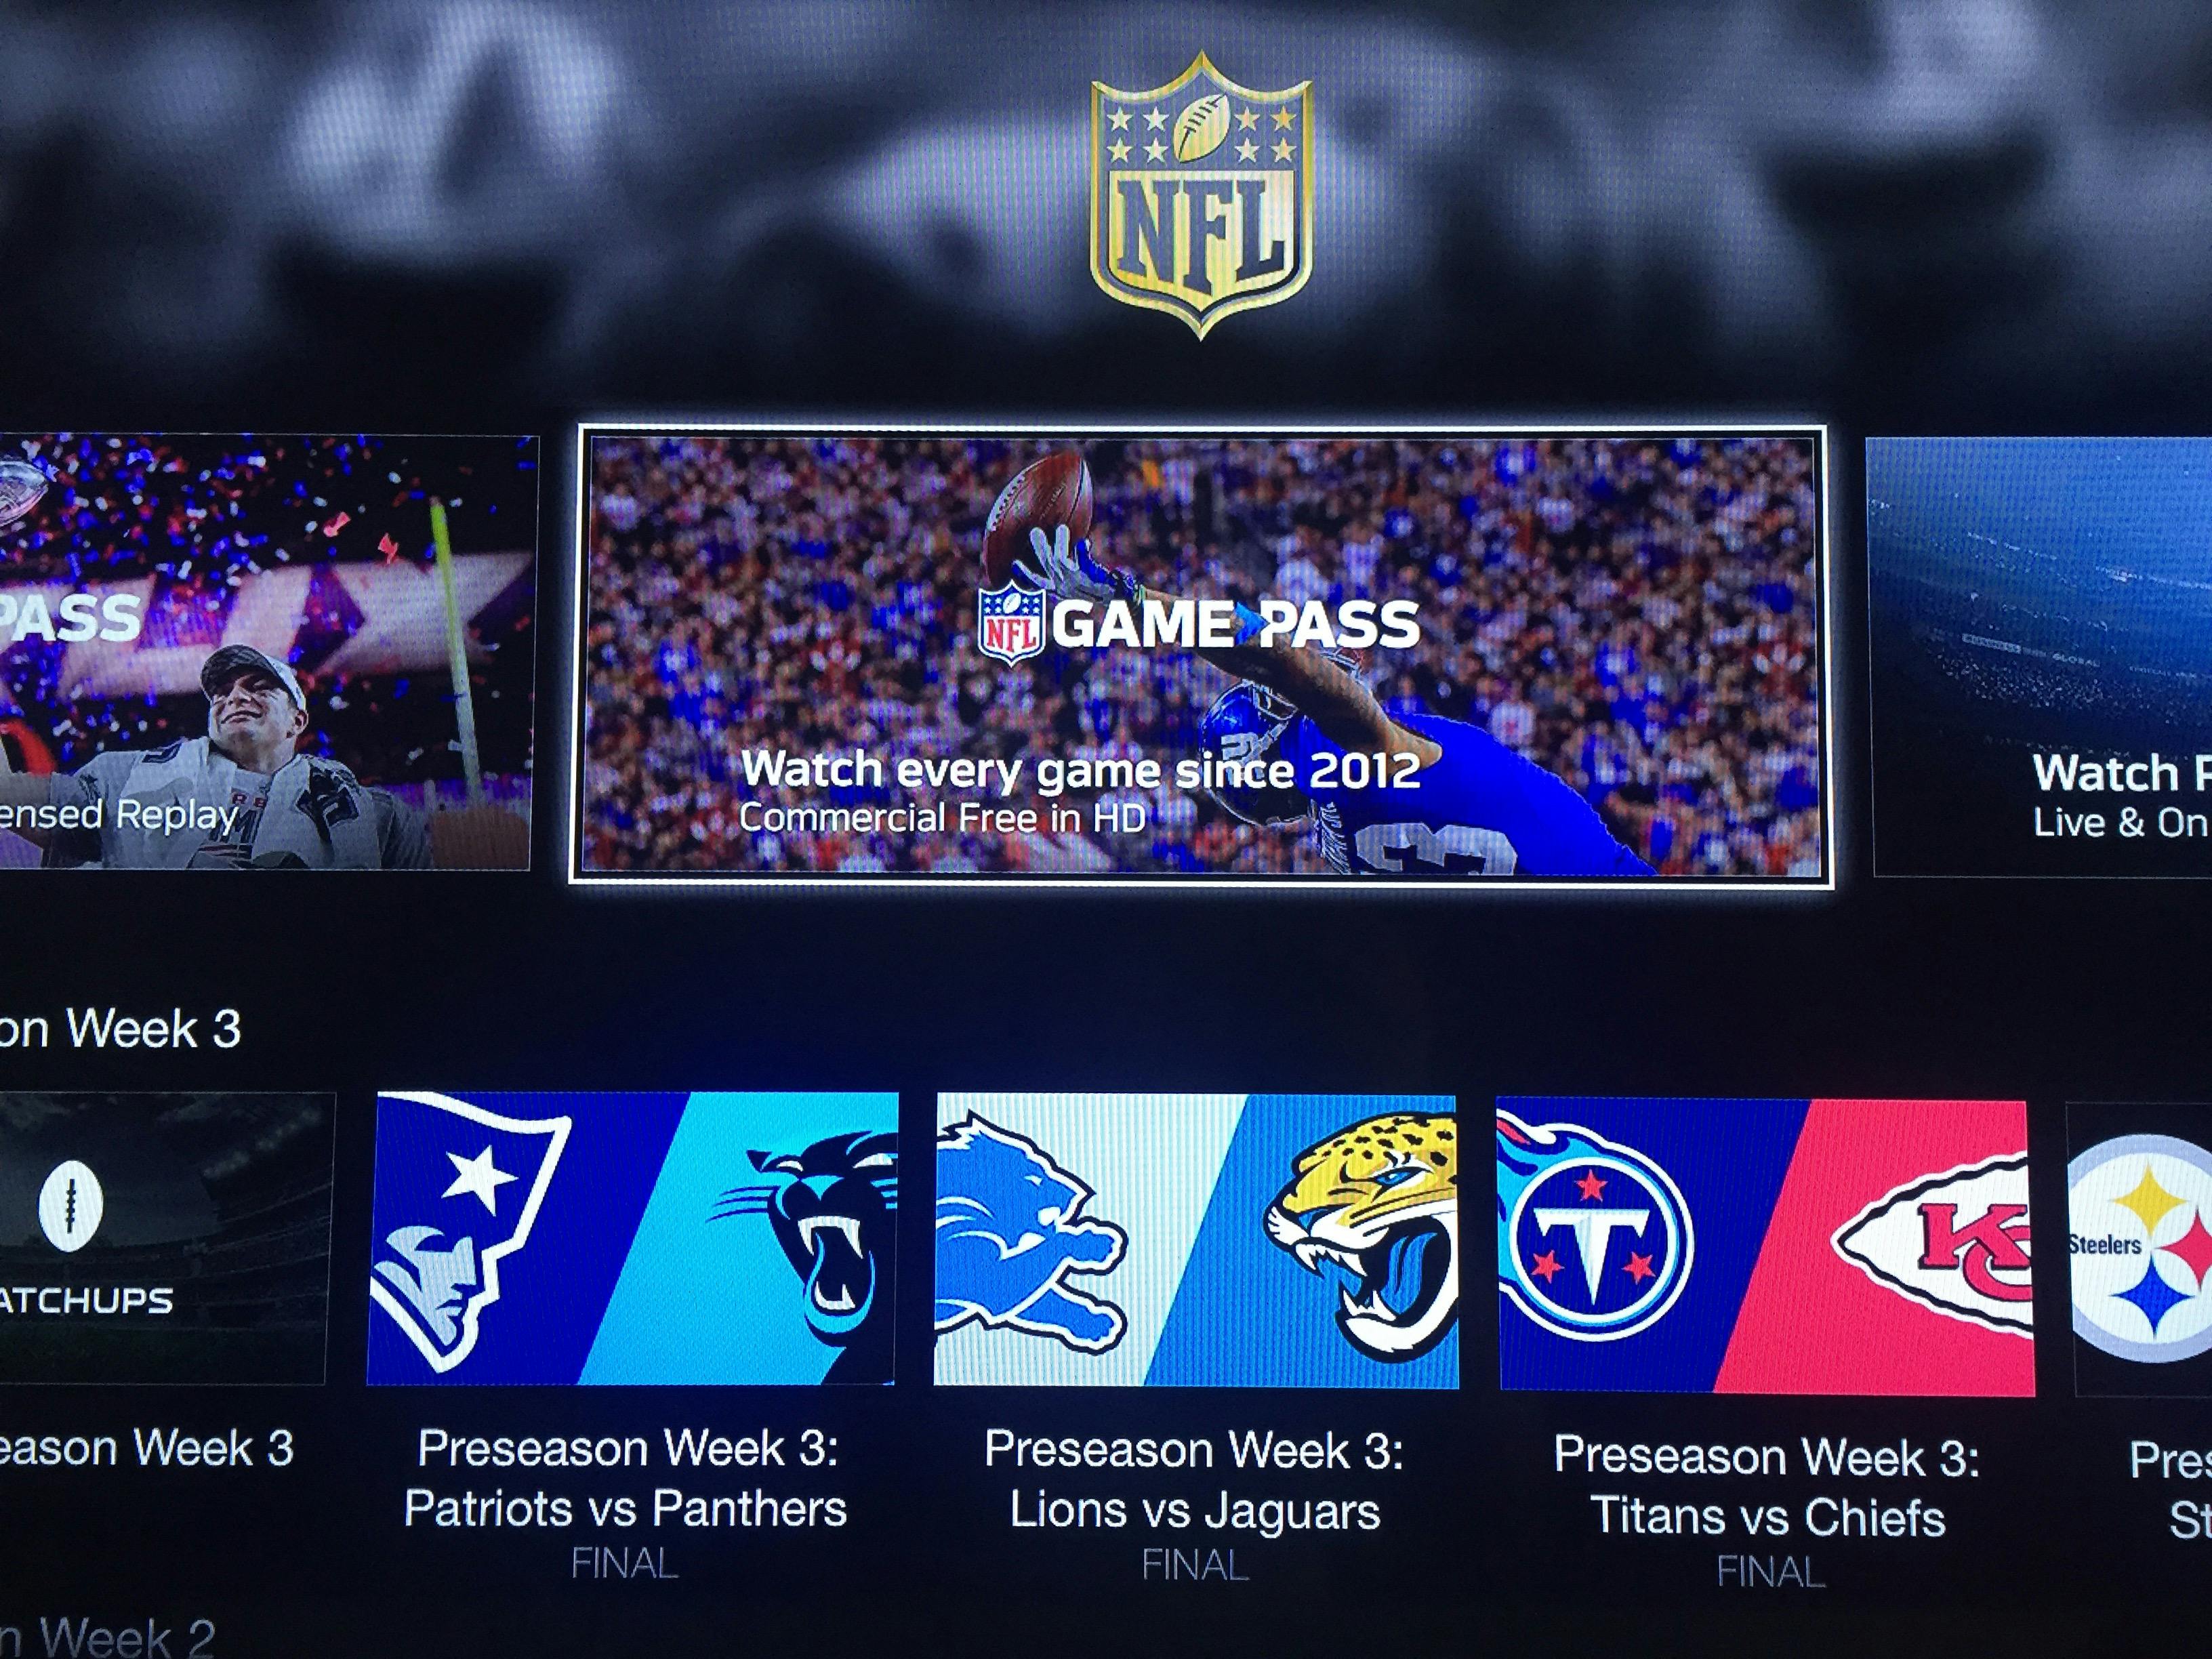 nfl game pass free username and password